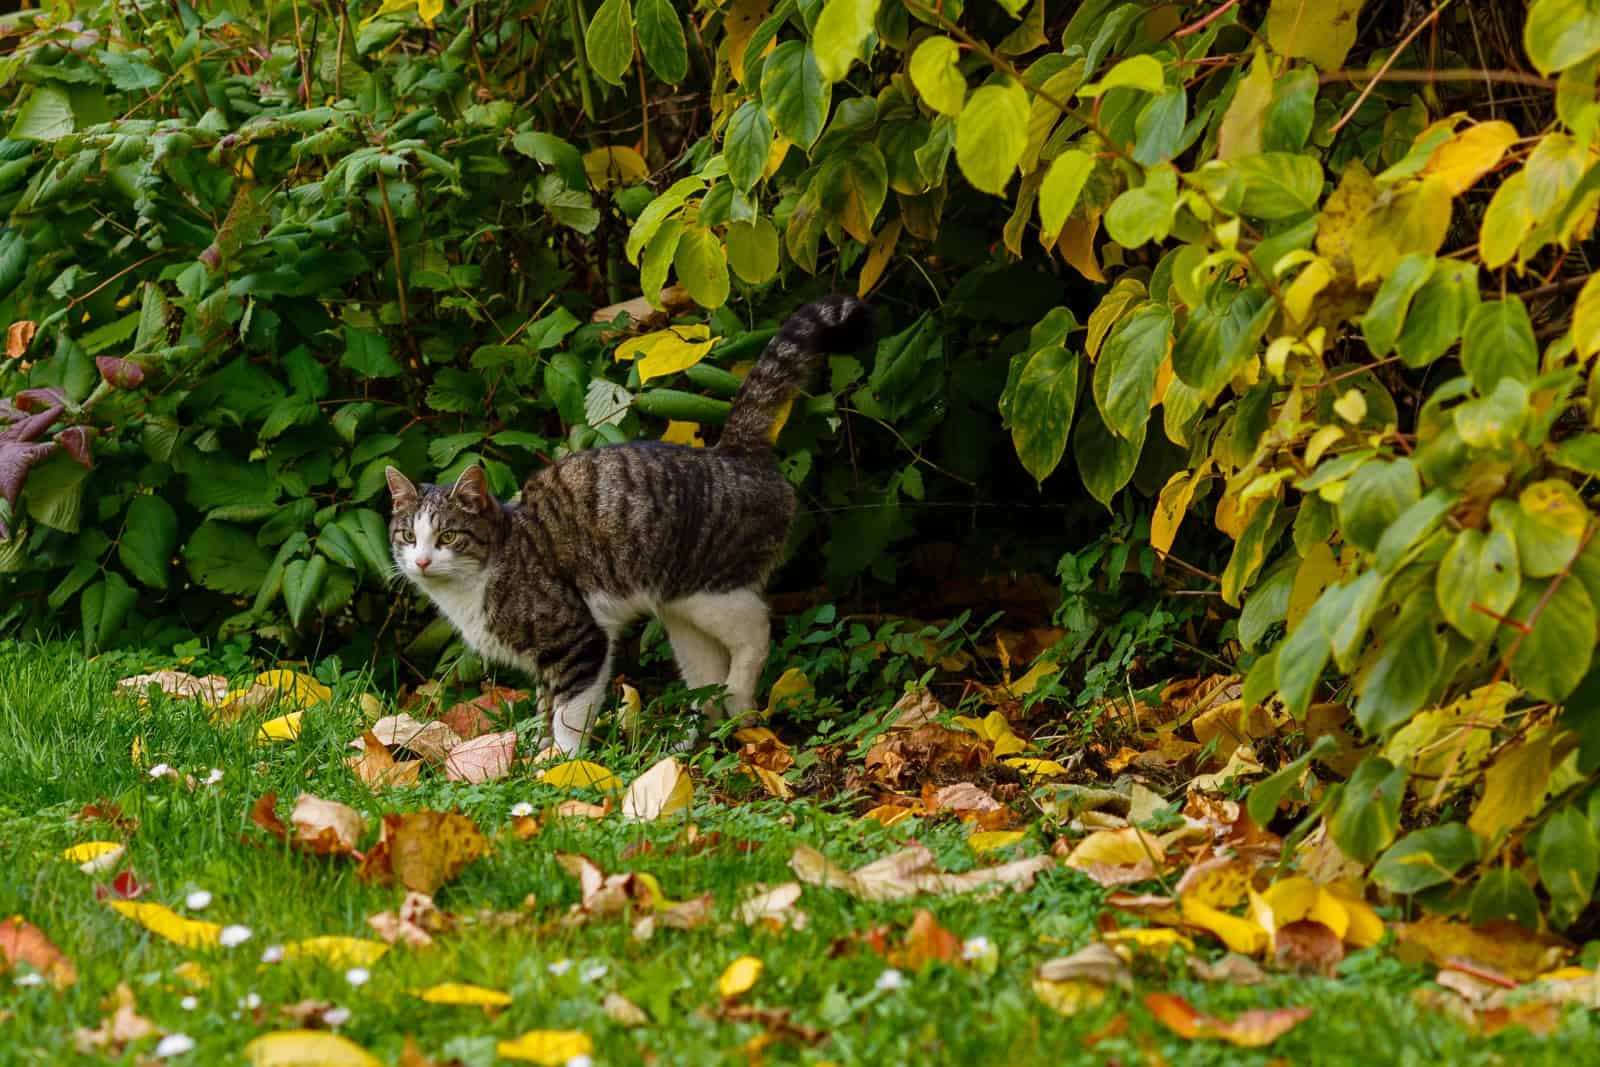 A beautiful cat marks its territory in the garden and sprays urine